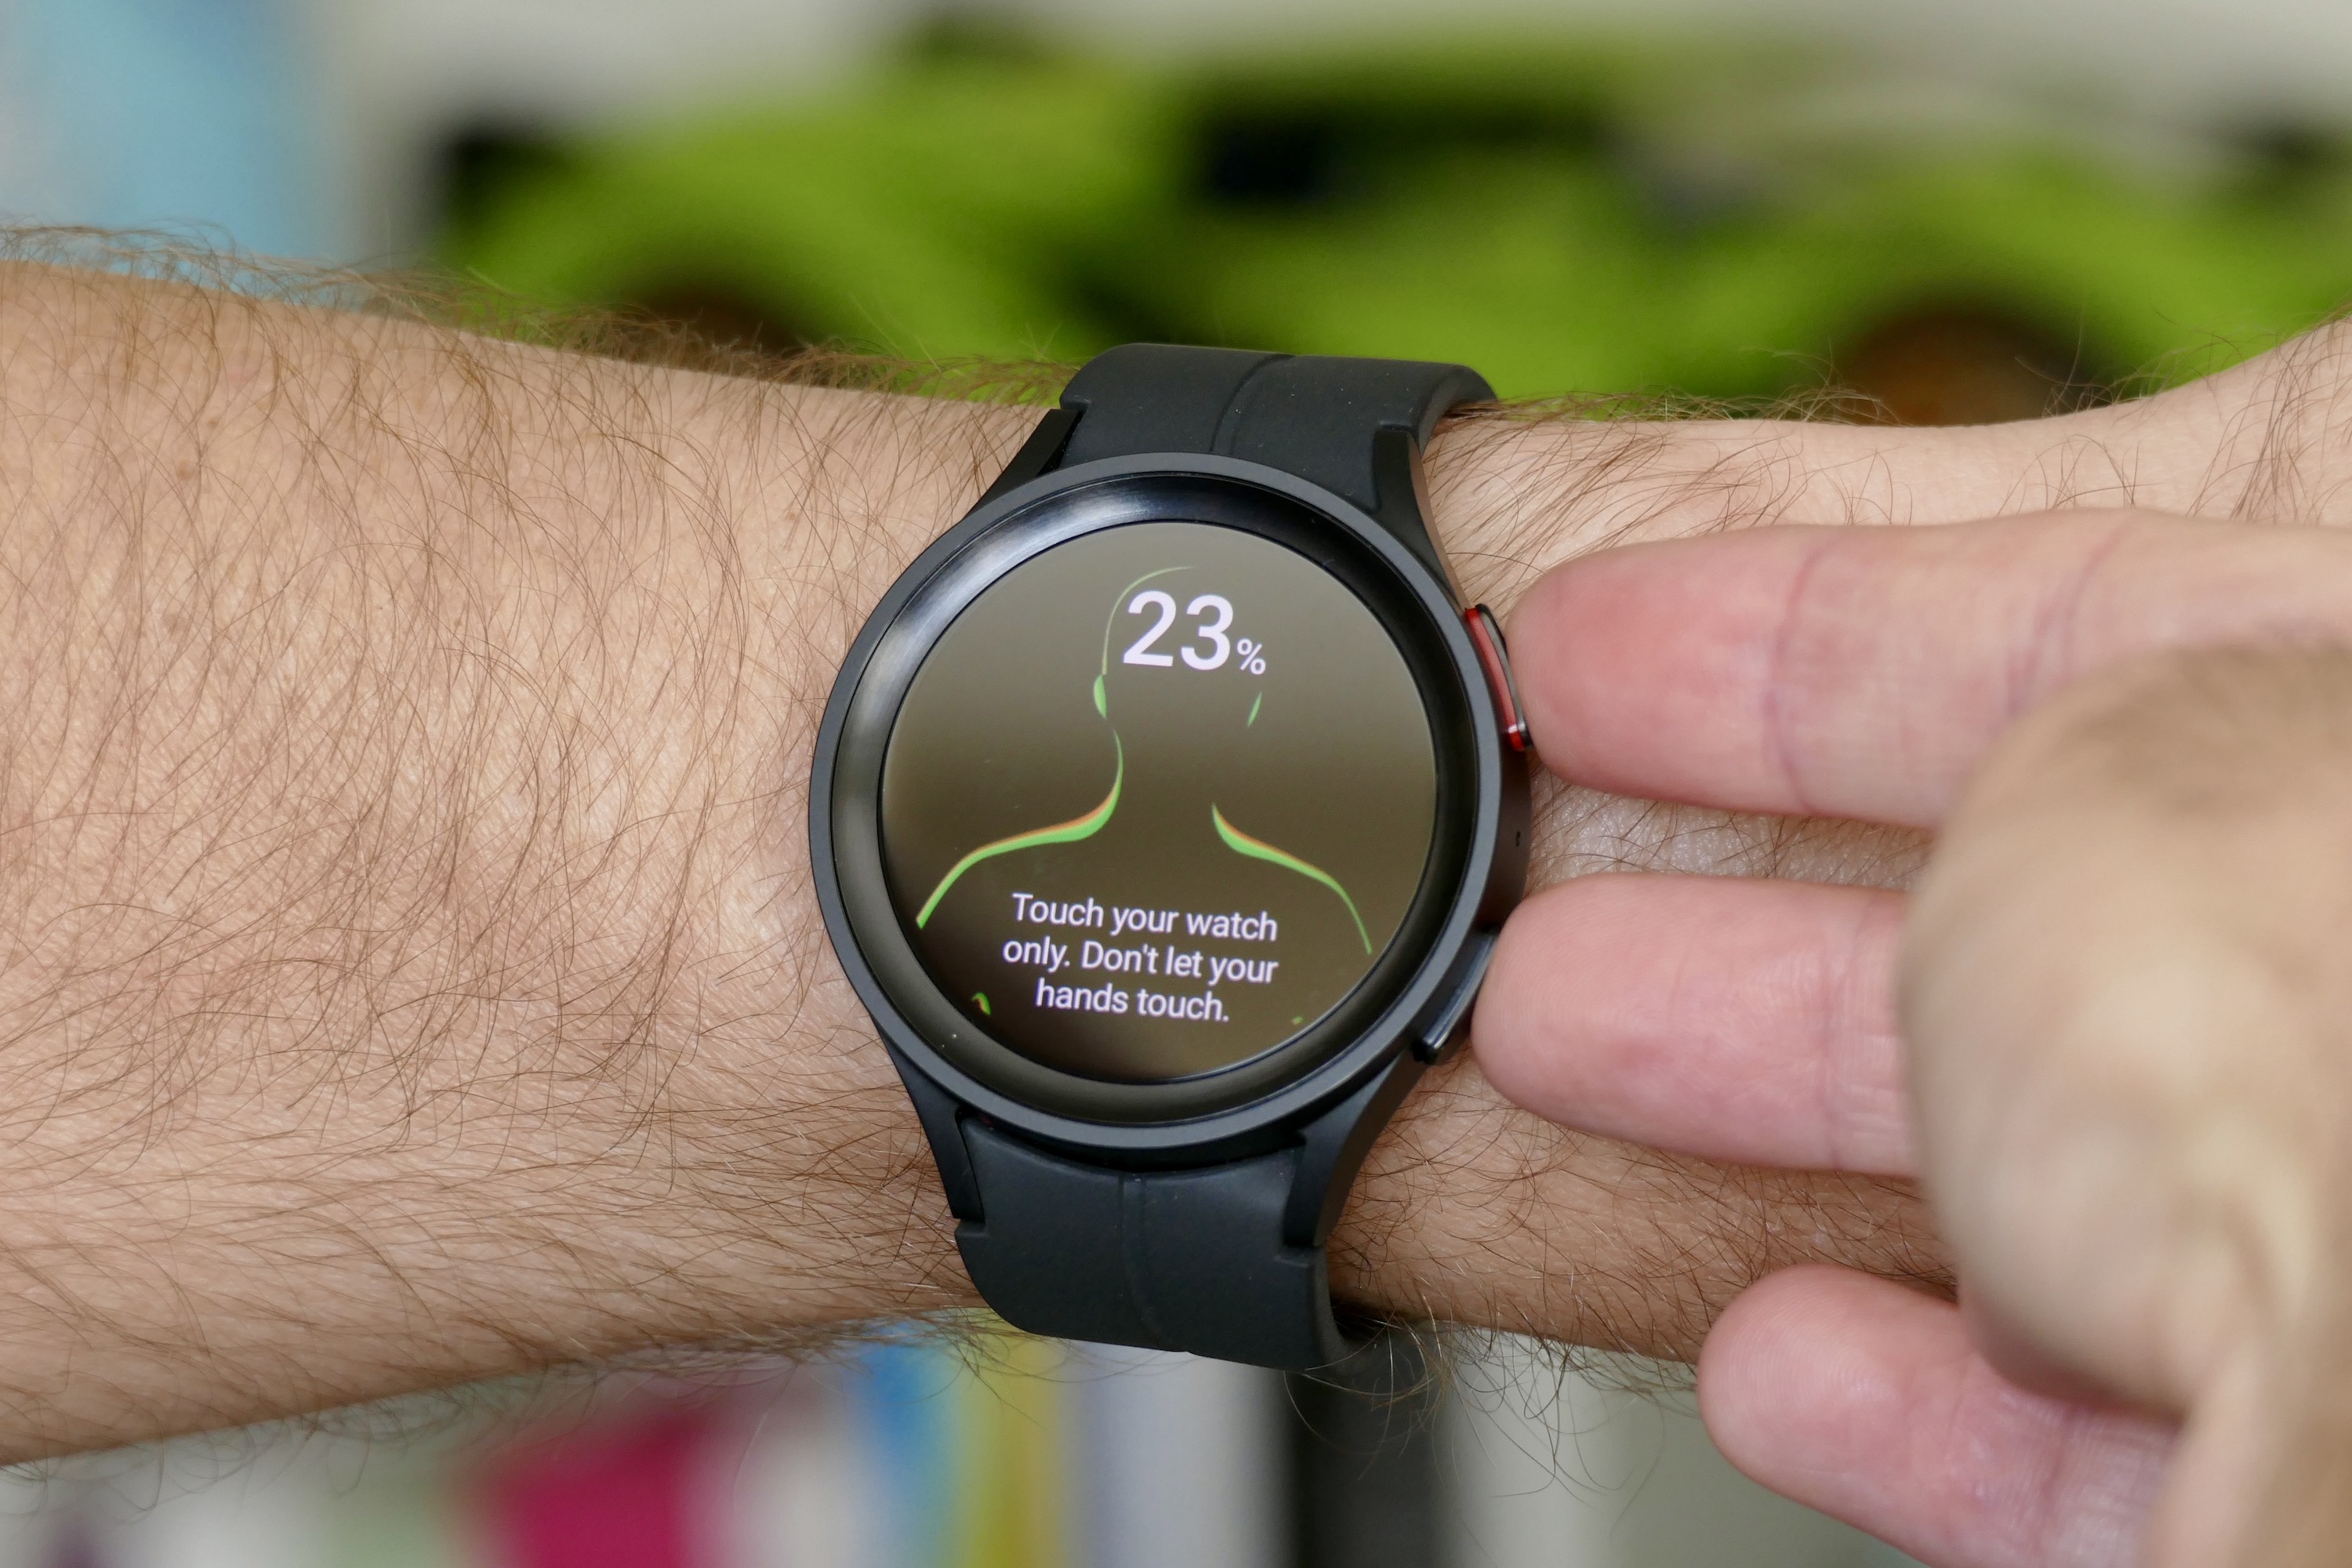 Galaxy Watch 4 review: Still the best Android smartwatches around